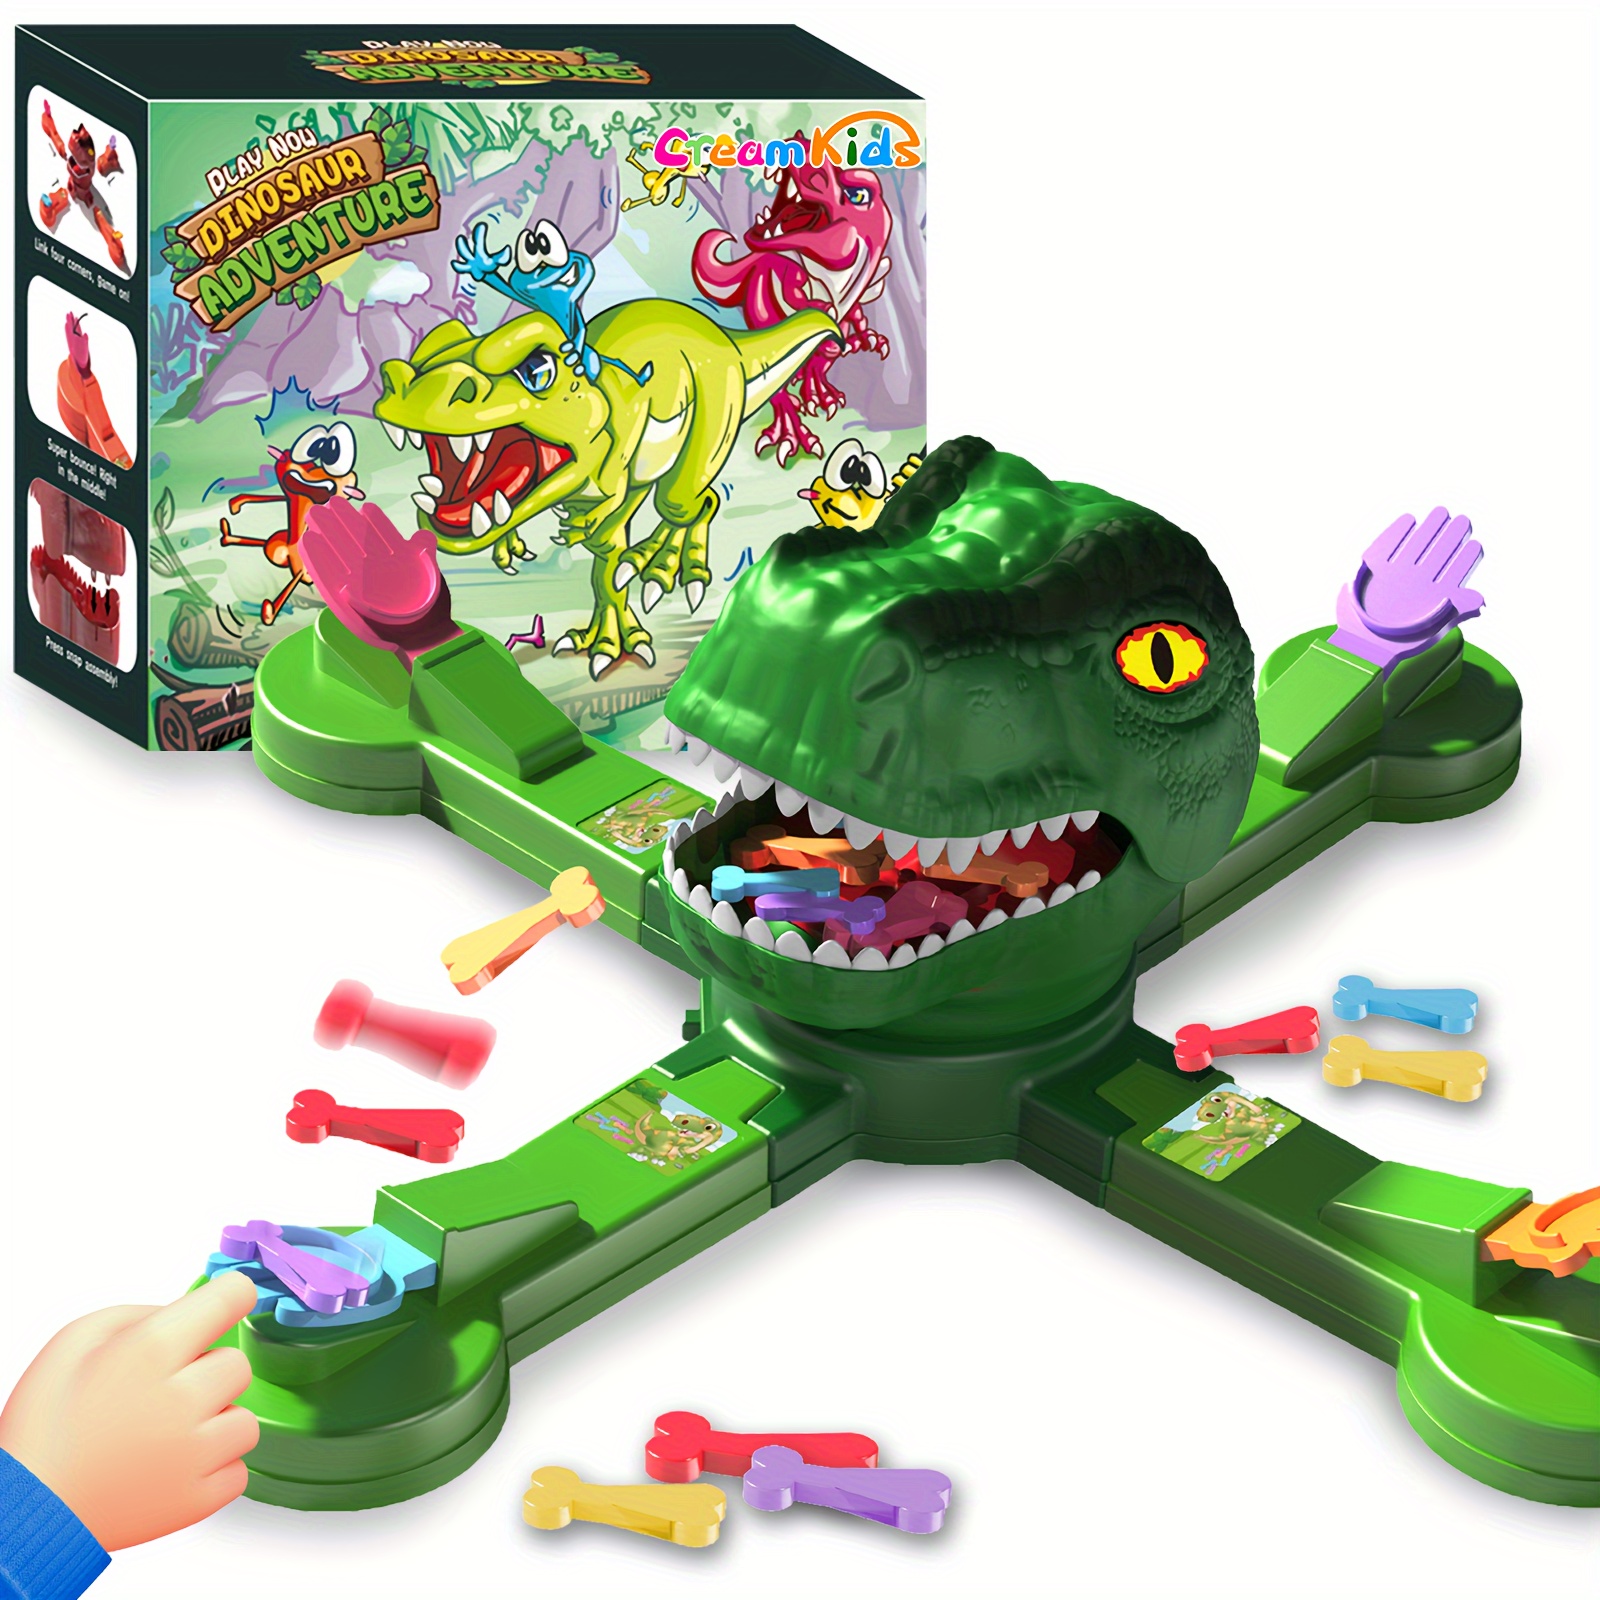 

Creamkids Bone Throwing Feeding Game Toys Set, Dinosaur Eat Competitive Game, Multi-player Interactive Desktop Toys, Board Game Toys For Famliy Time, Party Game Or Outdoor Toy For Adults And Kids 3+